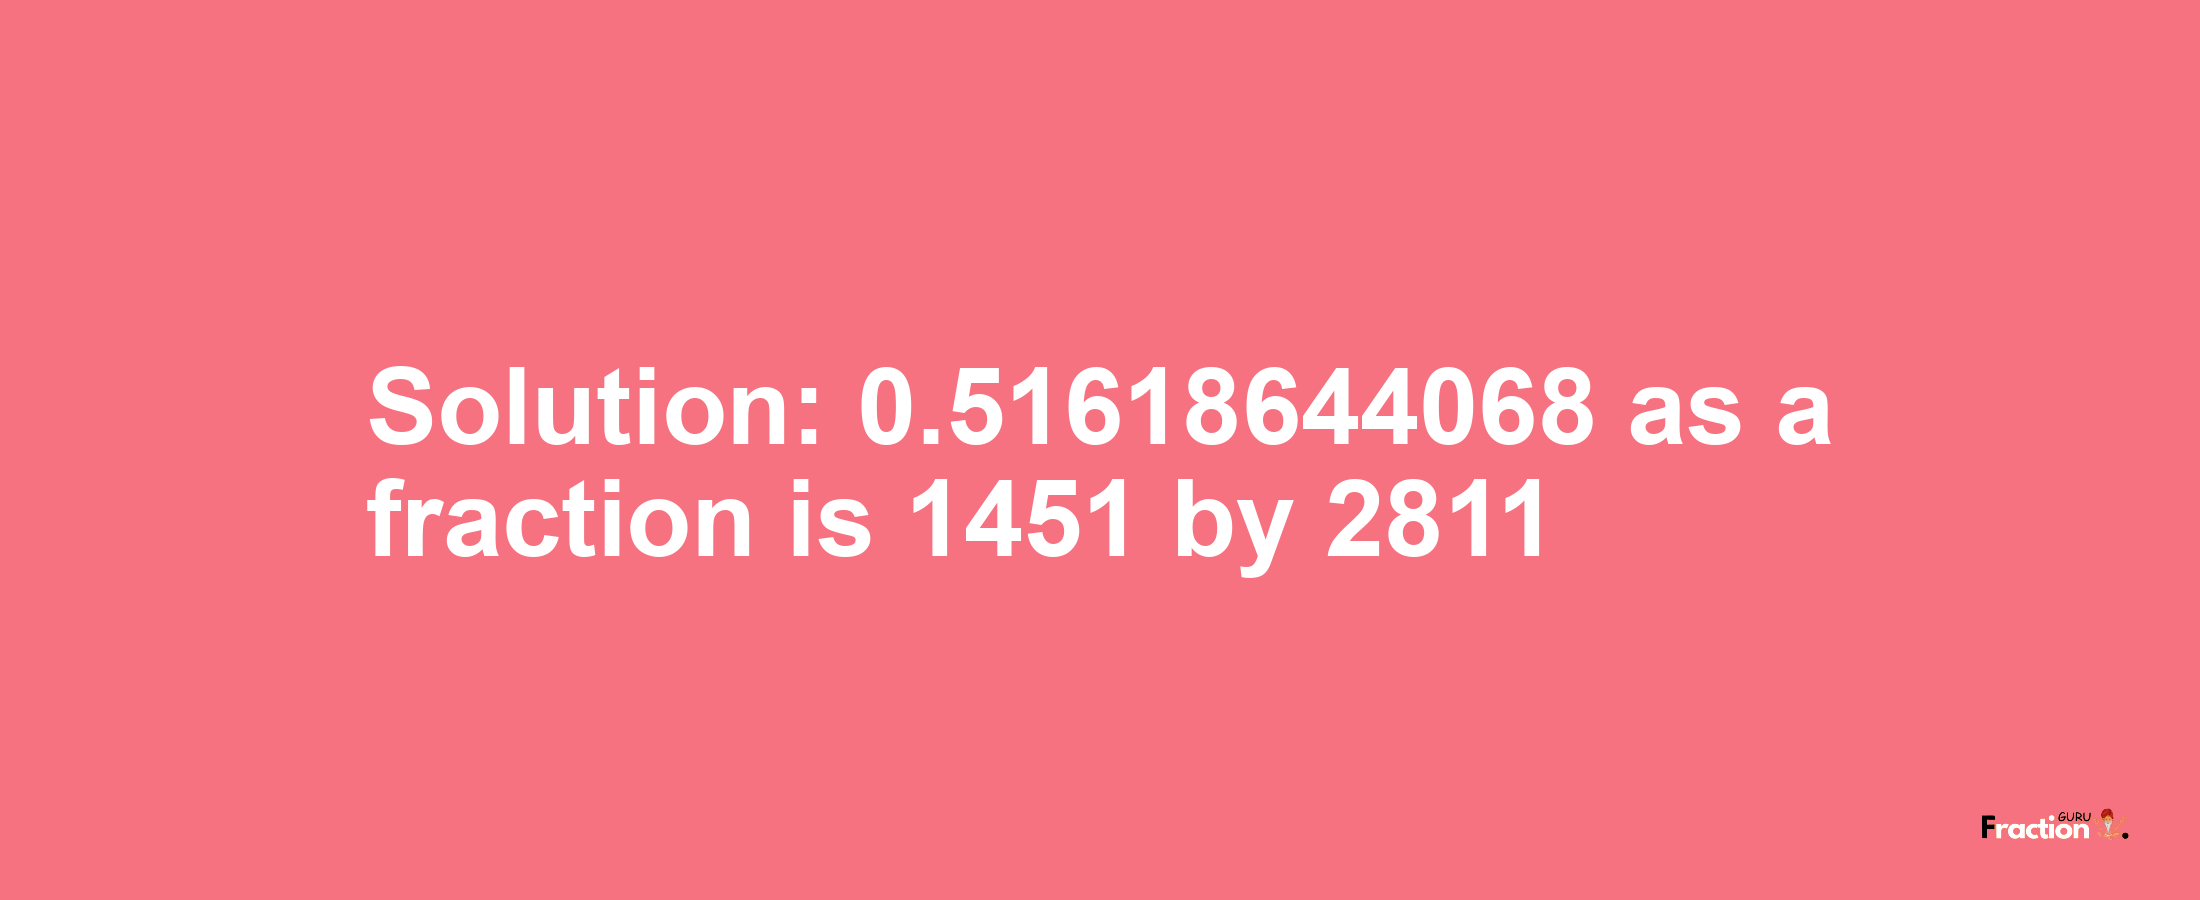 Solution:0.51618644068 as a fraction is 1451/2811